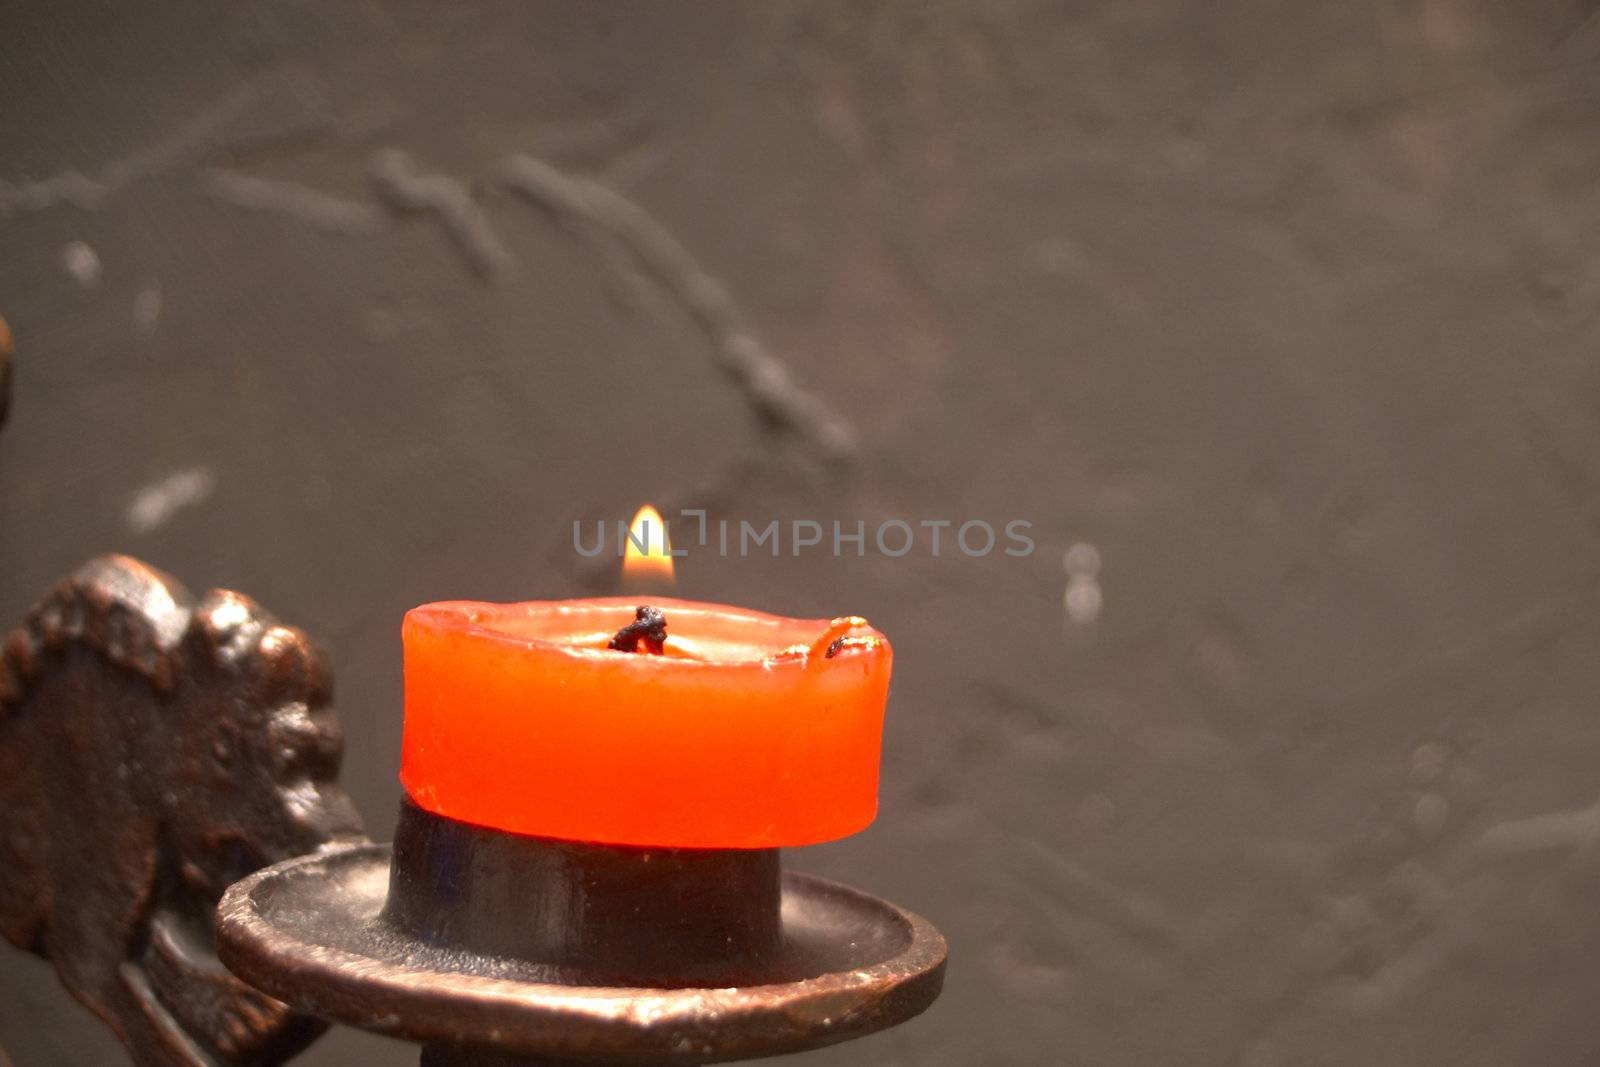 An image of a candle on a candlestick